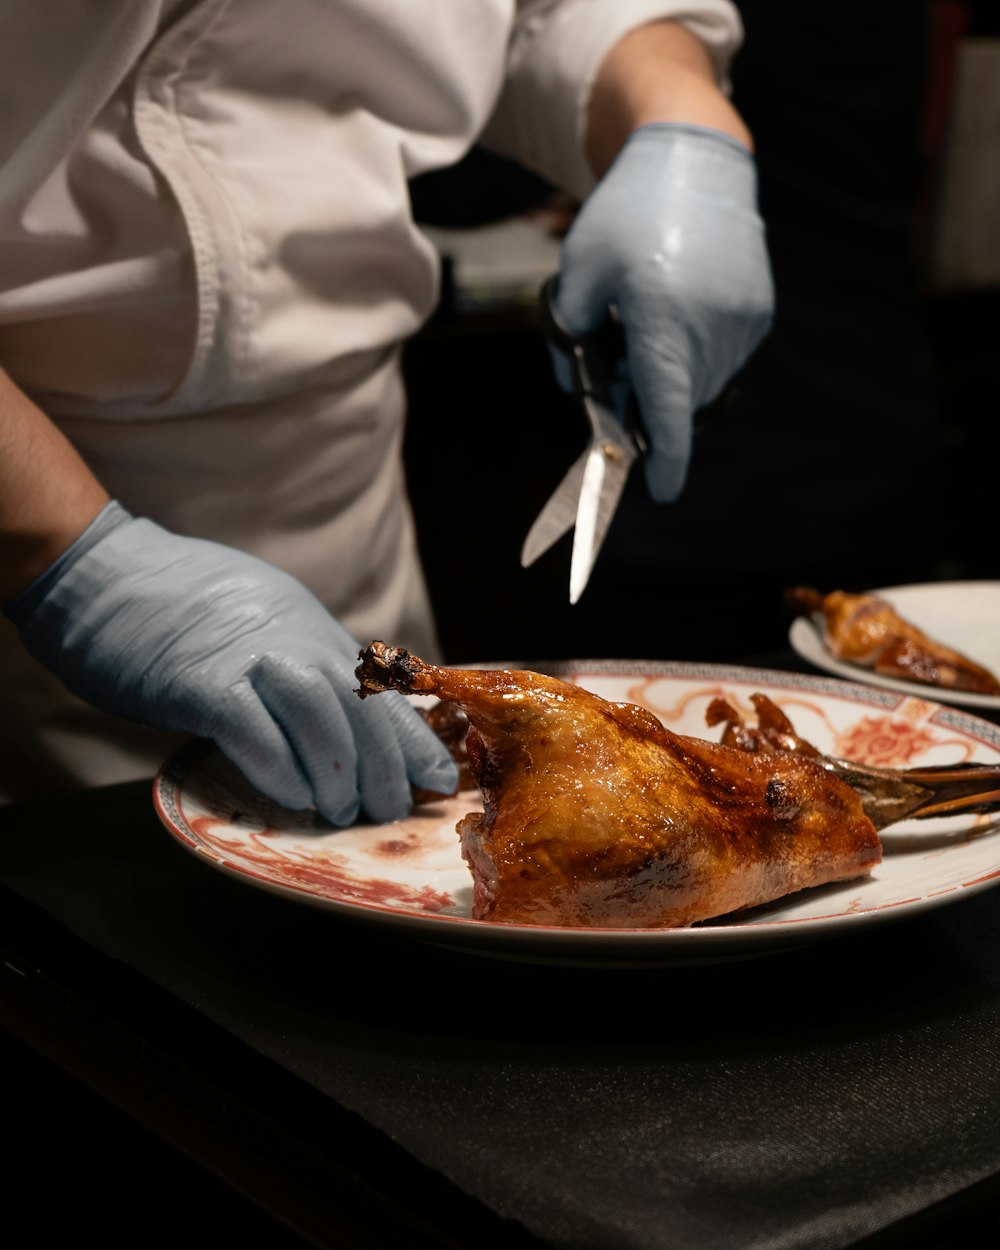 a person in white gloves cutting a piece of meat on a plate